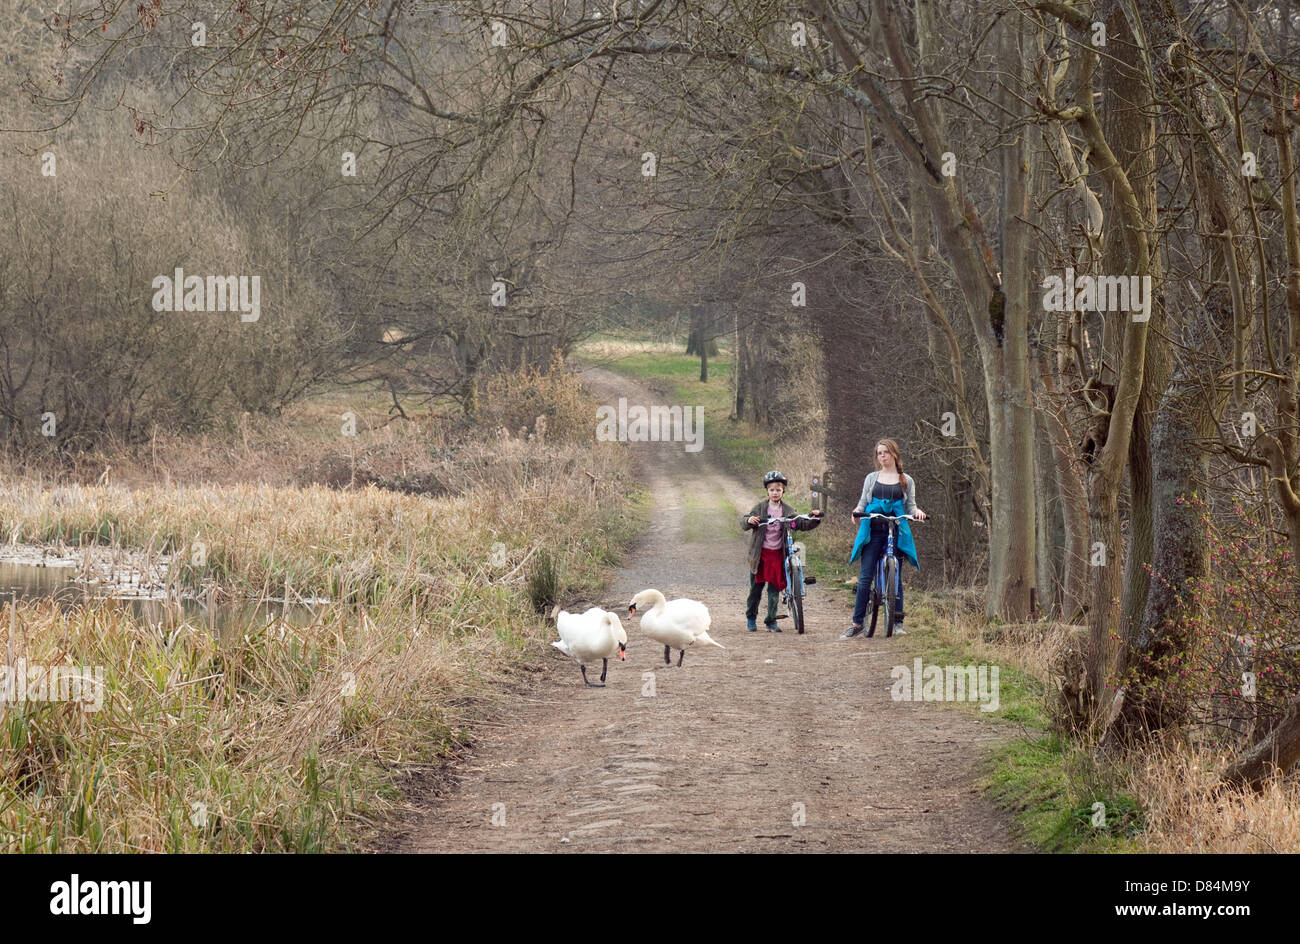 Children, swans and woodland trees in a Suffolk countryside scene, Ickworth, Suffolk UK Stock Photo